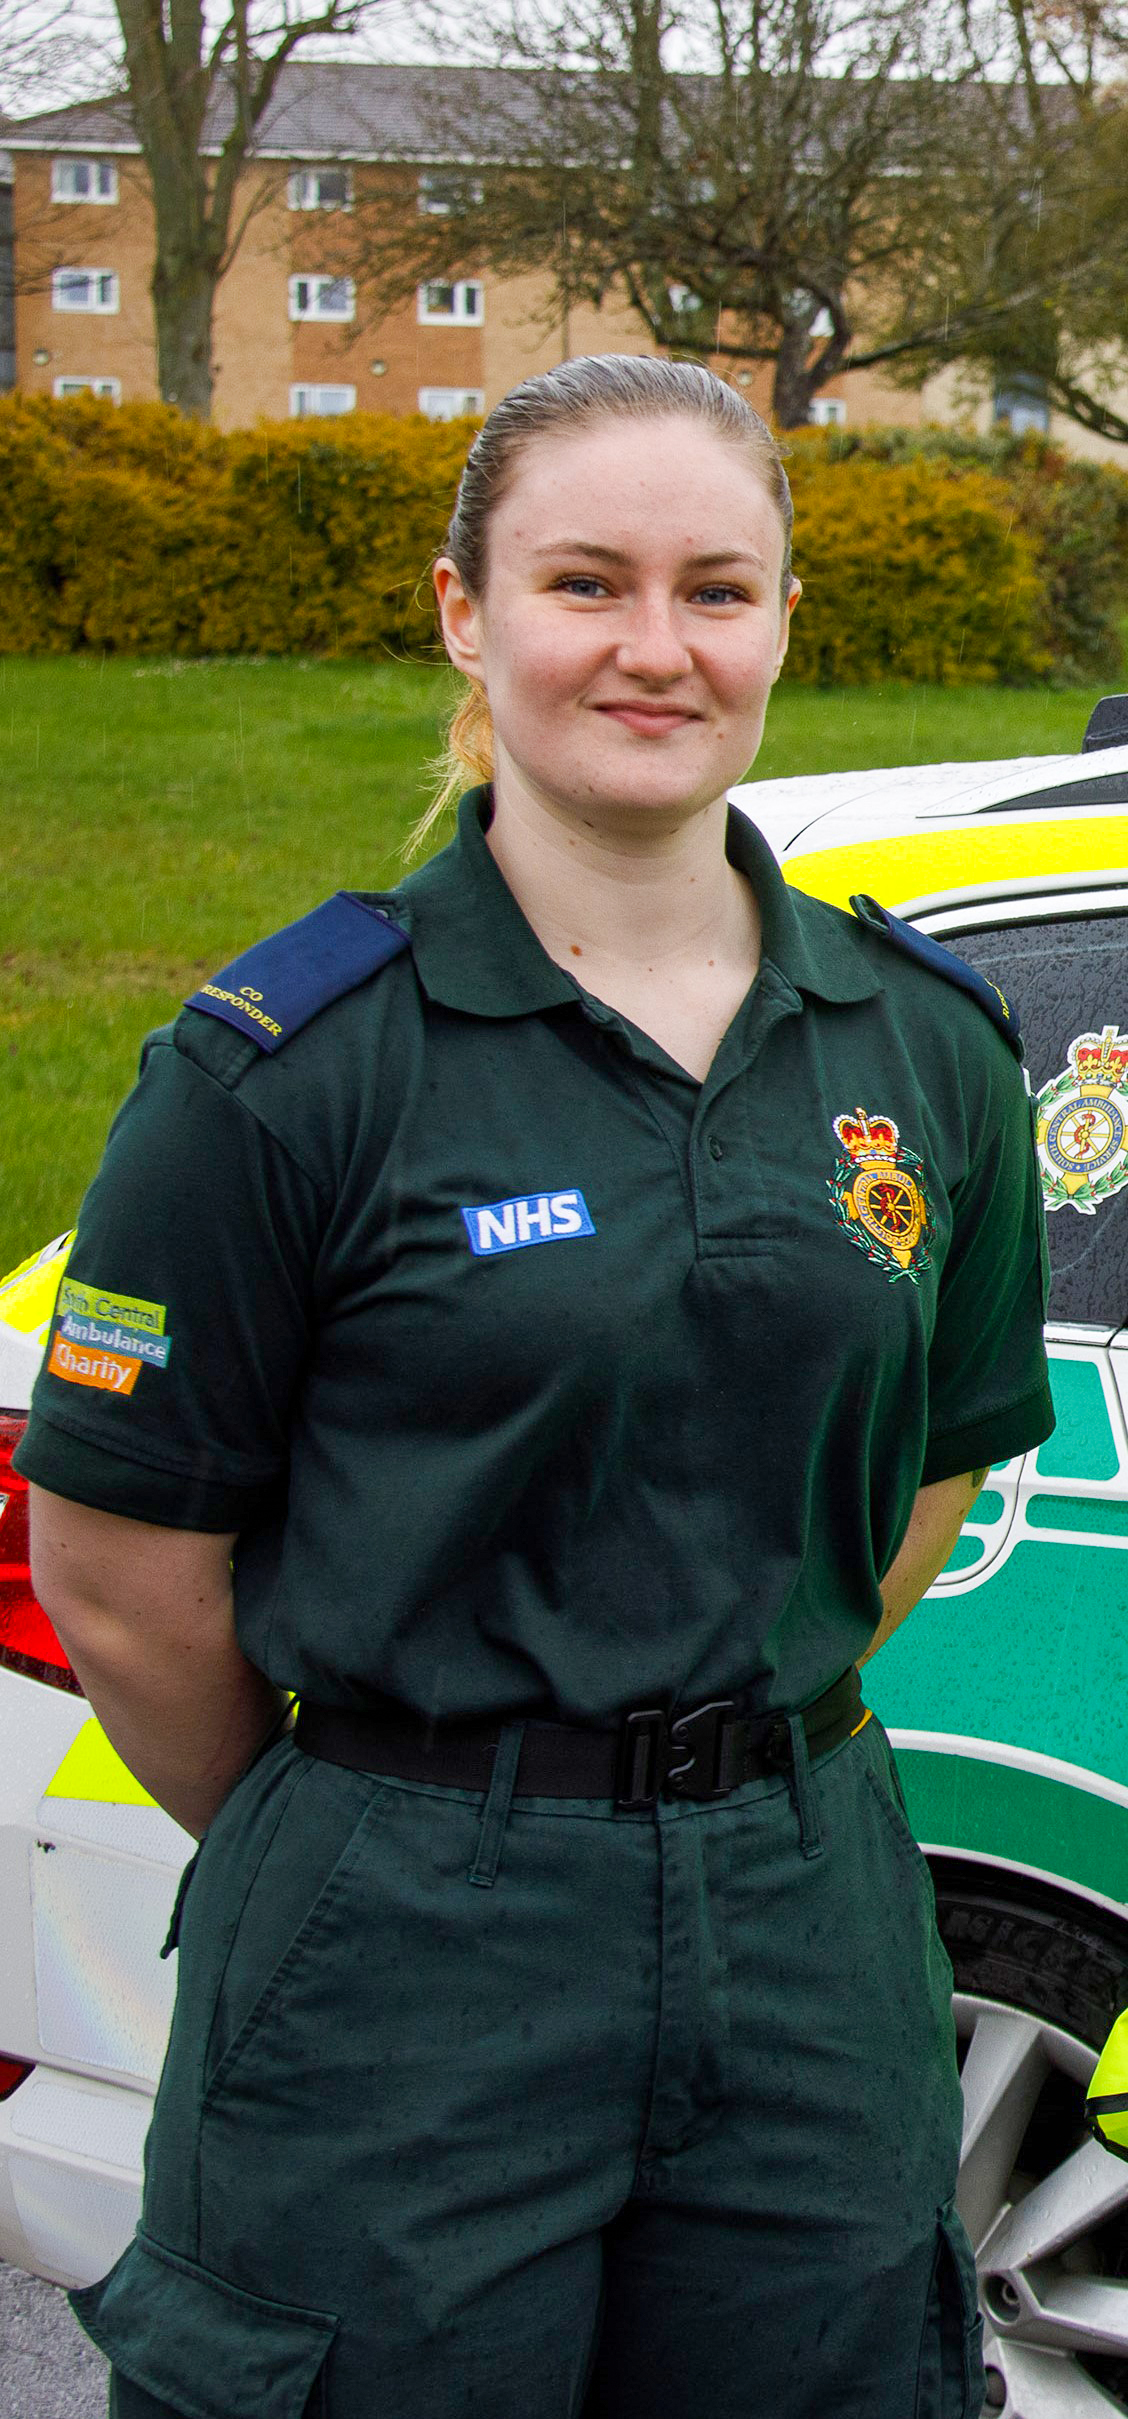 Corporal Charlotte Jones, RAF Police and Security Flight, RAF Brize Norton, volunteers her time as a Co-Responder with South Central Ambulance Service.